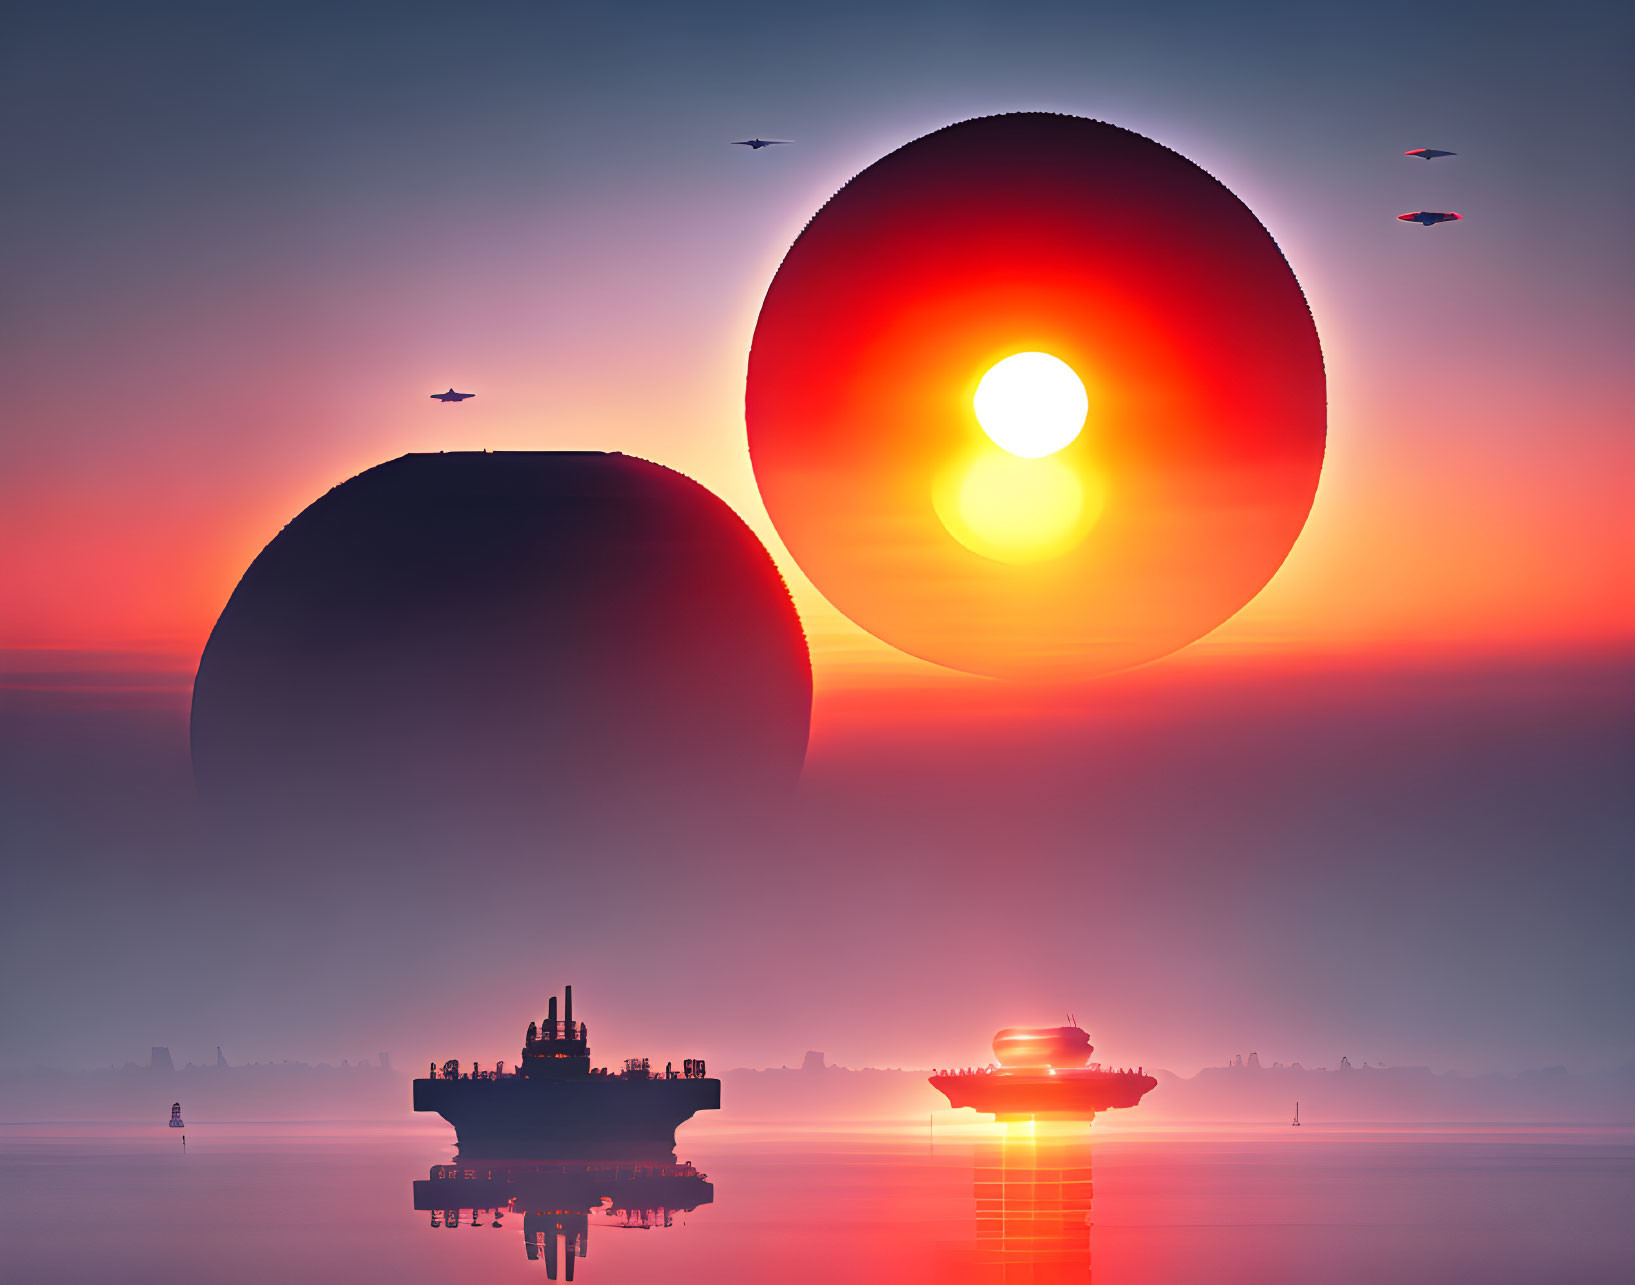 Futuristic landscape with floating circular structures and silhouetted birds